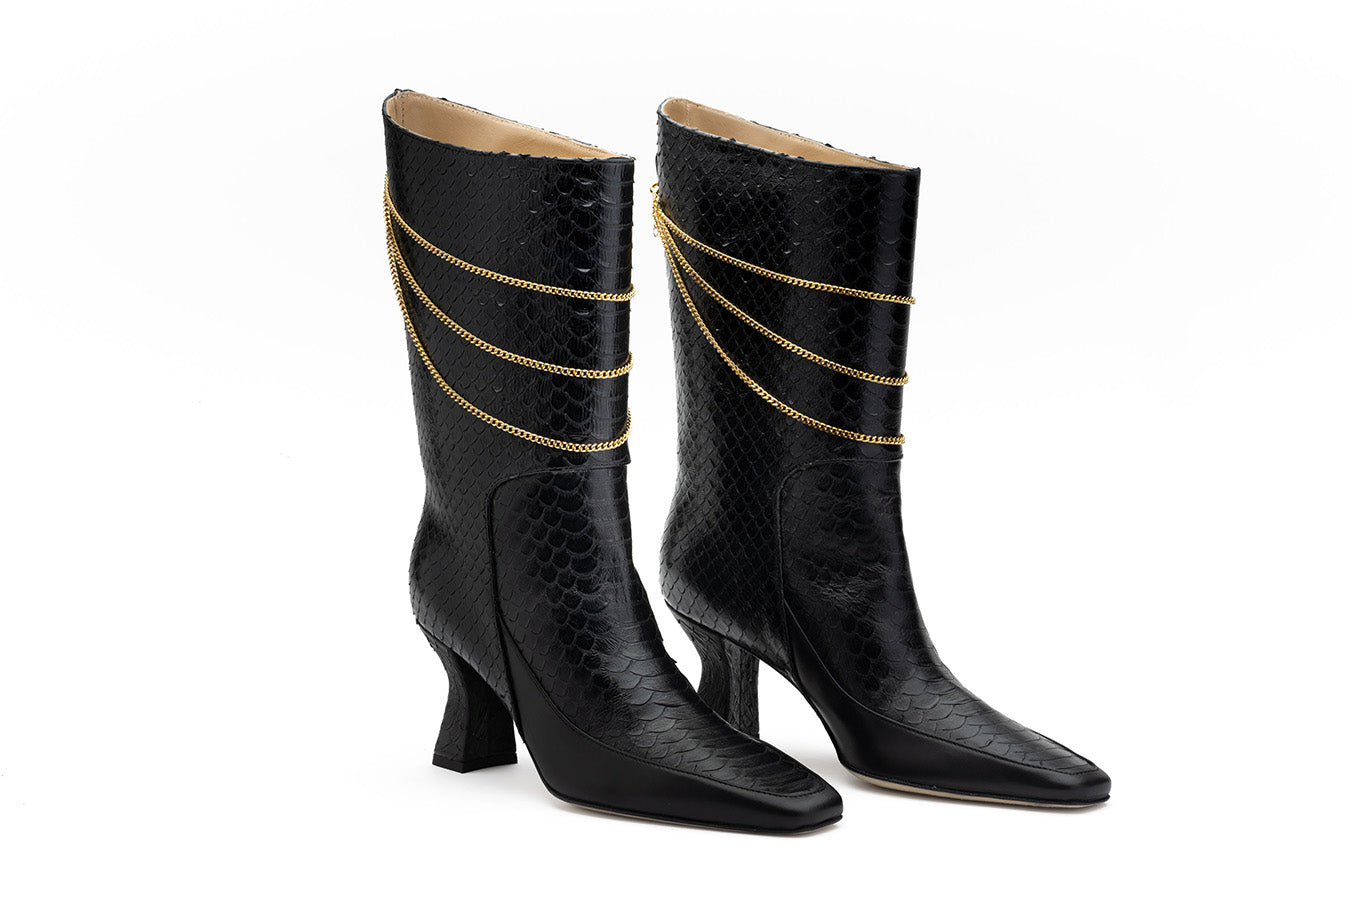 Calf high black boots Femme Liberee Naomi Black Python Print Boot shot at an angle from the front on white background